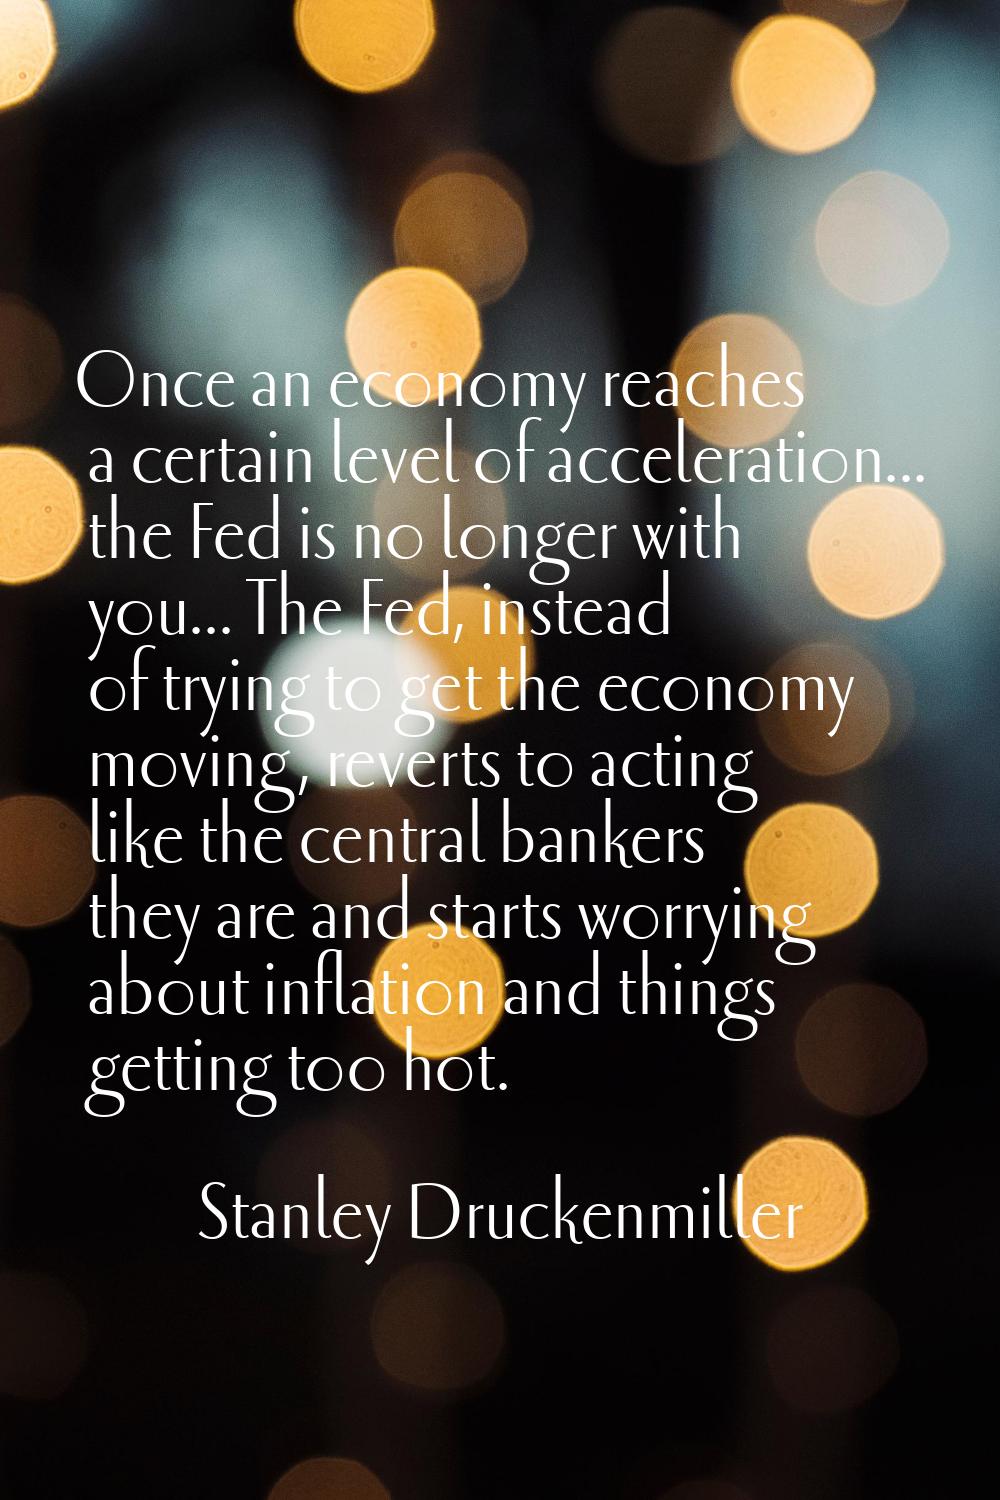 Once an economy reaches a certain level of acceleration... the Fed is no longer with you... The Fed